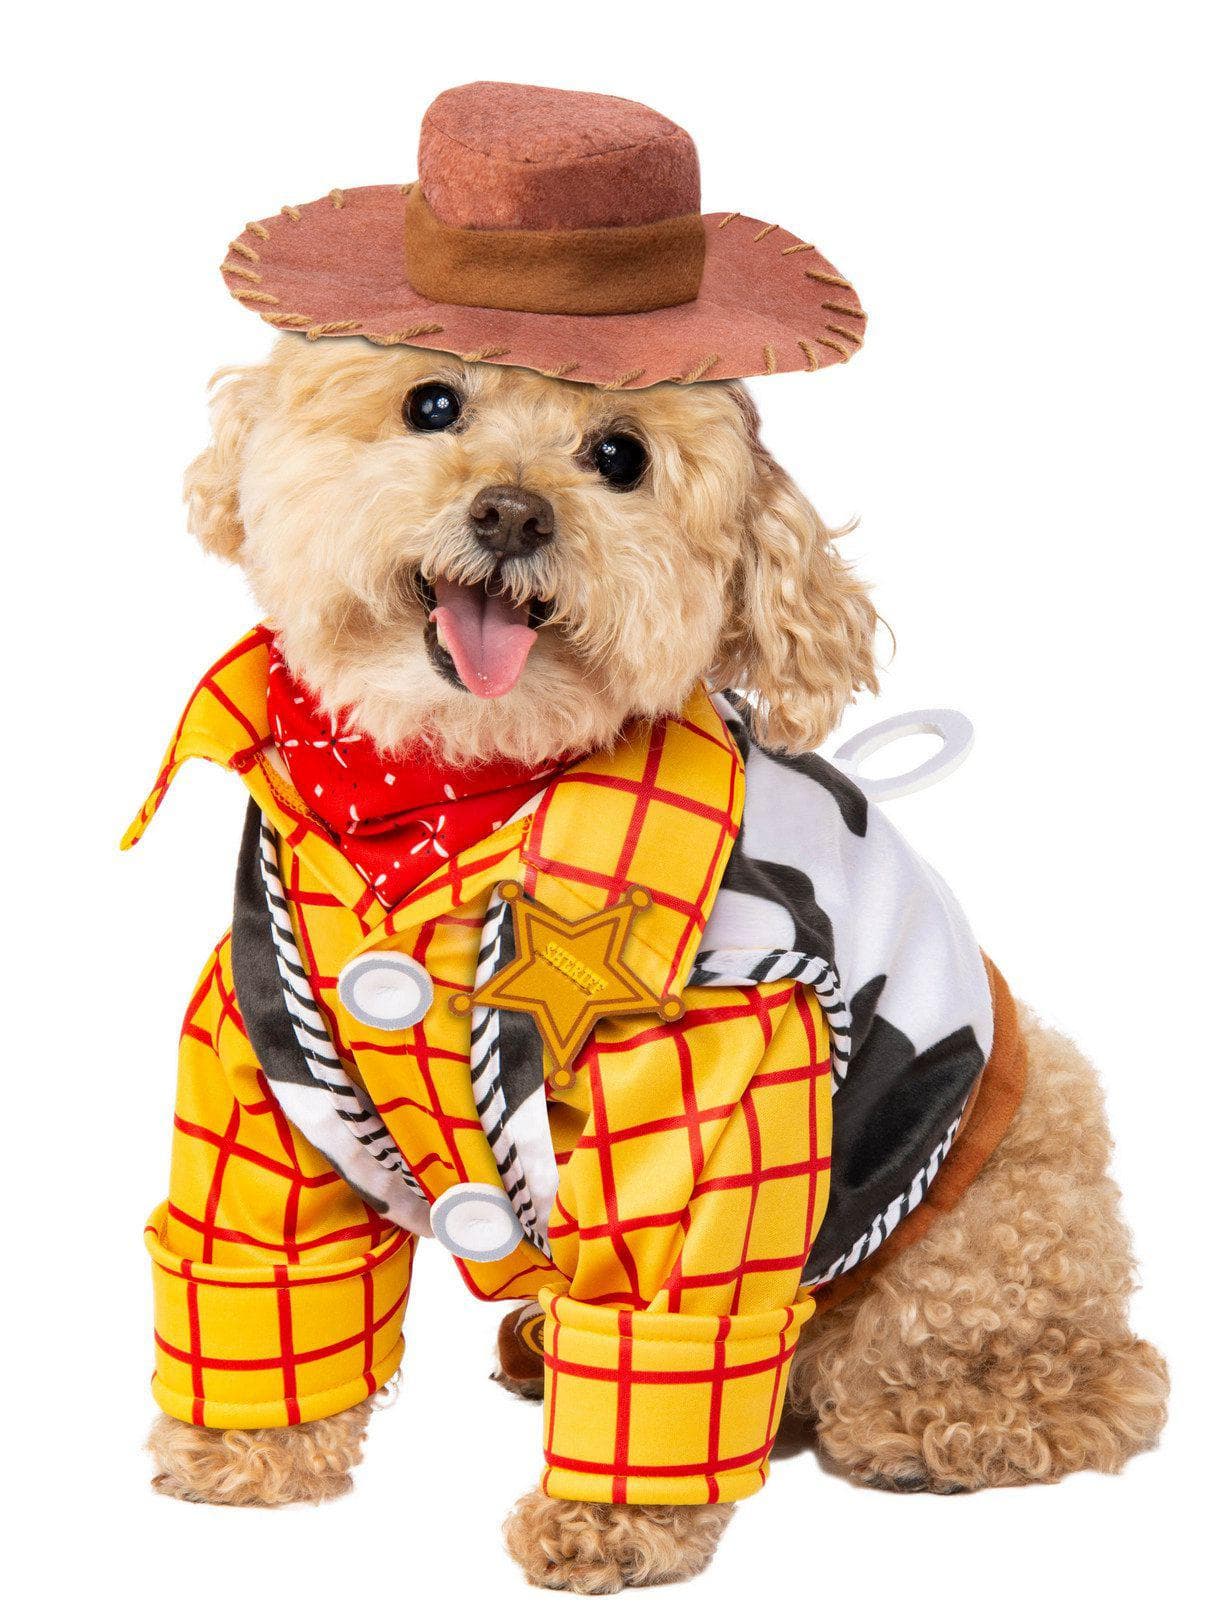 Toy Story Woody Pet Costume - costumes.com